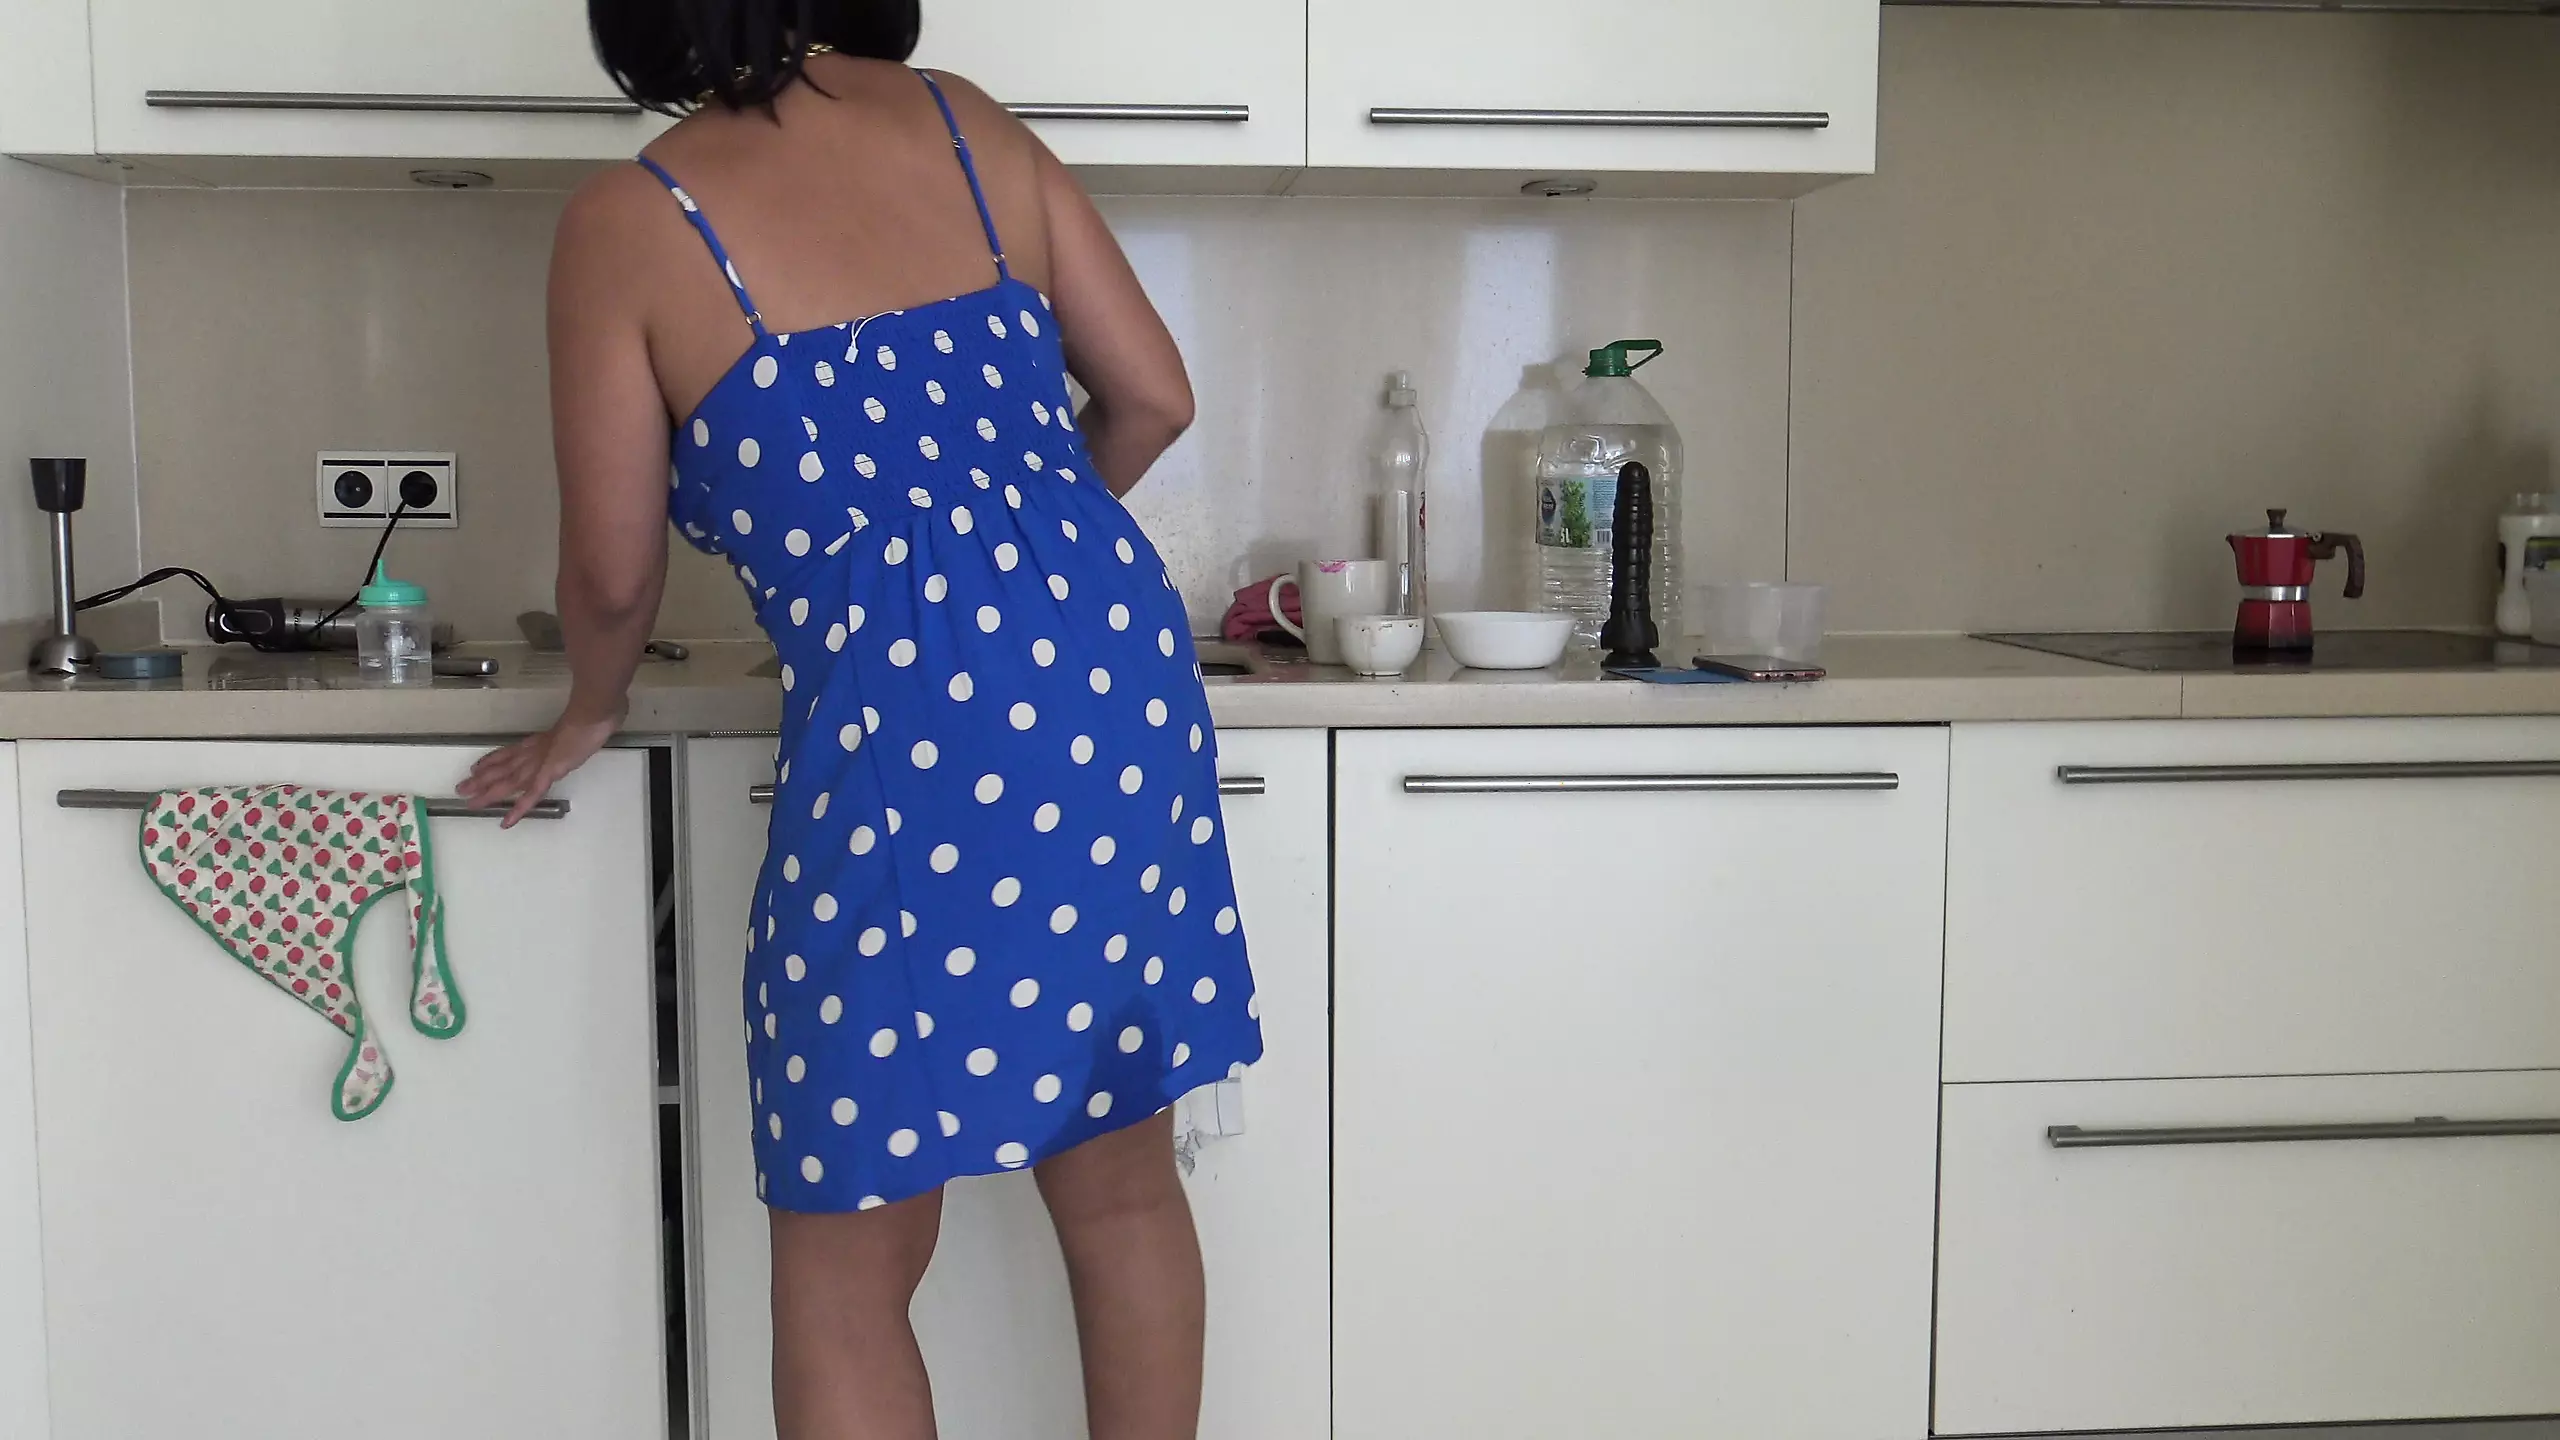 Busty French Cuckolding Wife Has Kitchen photo